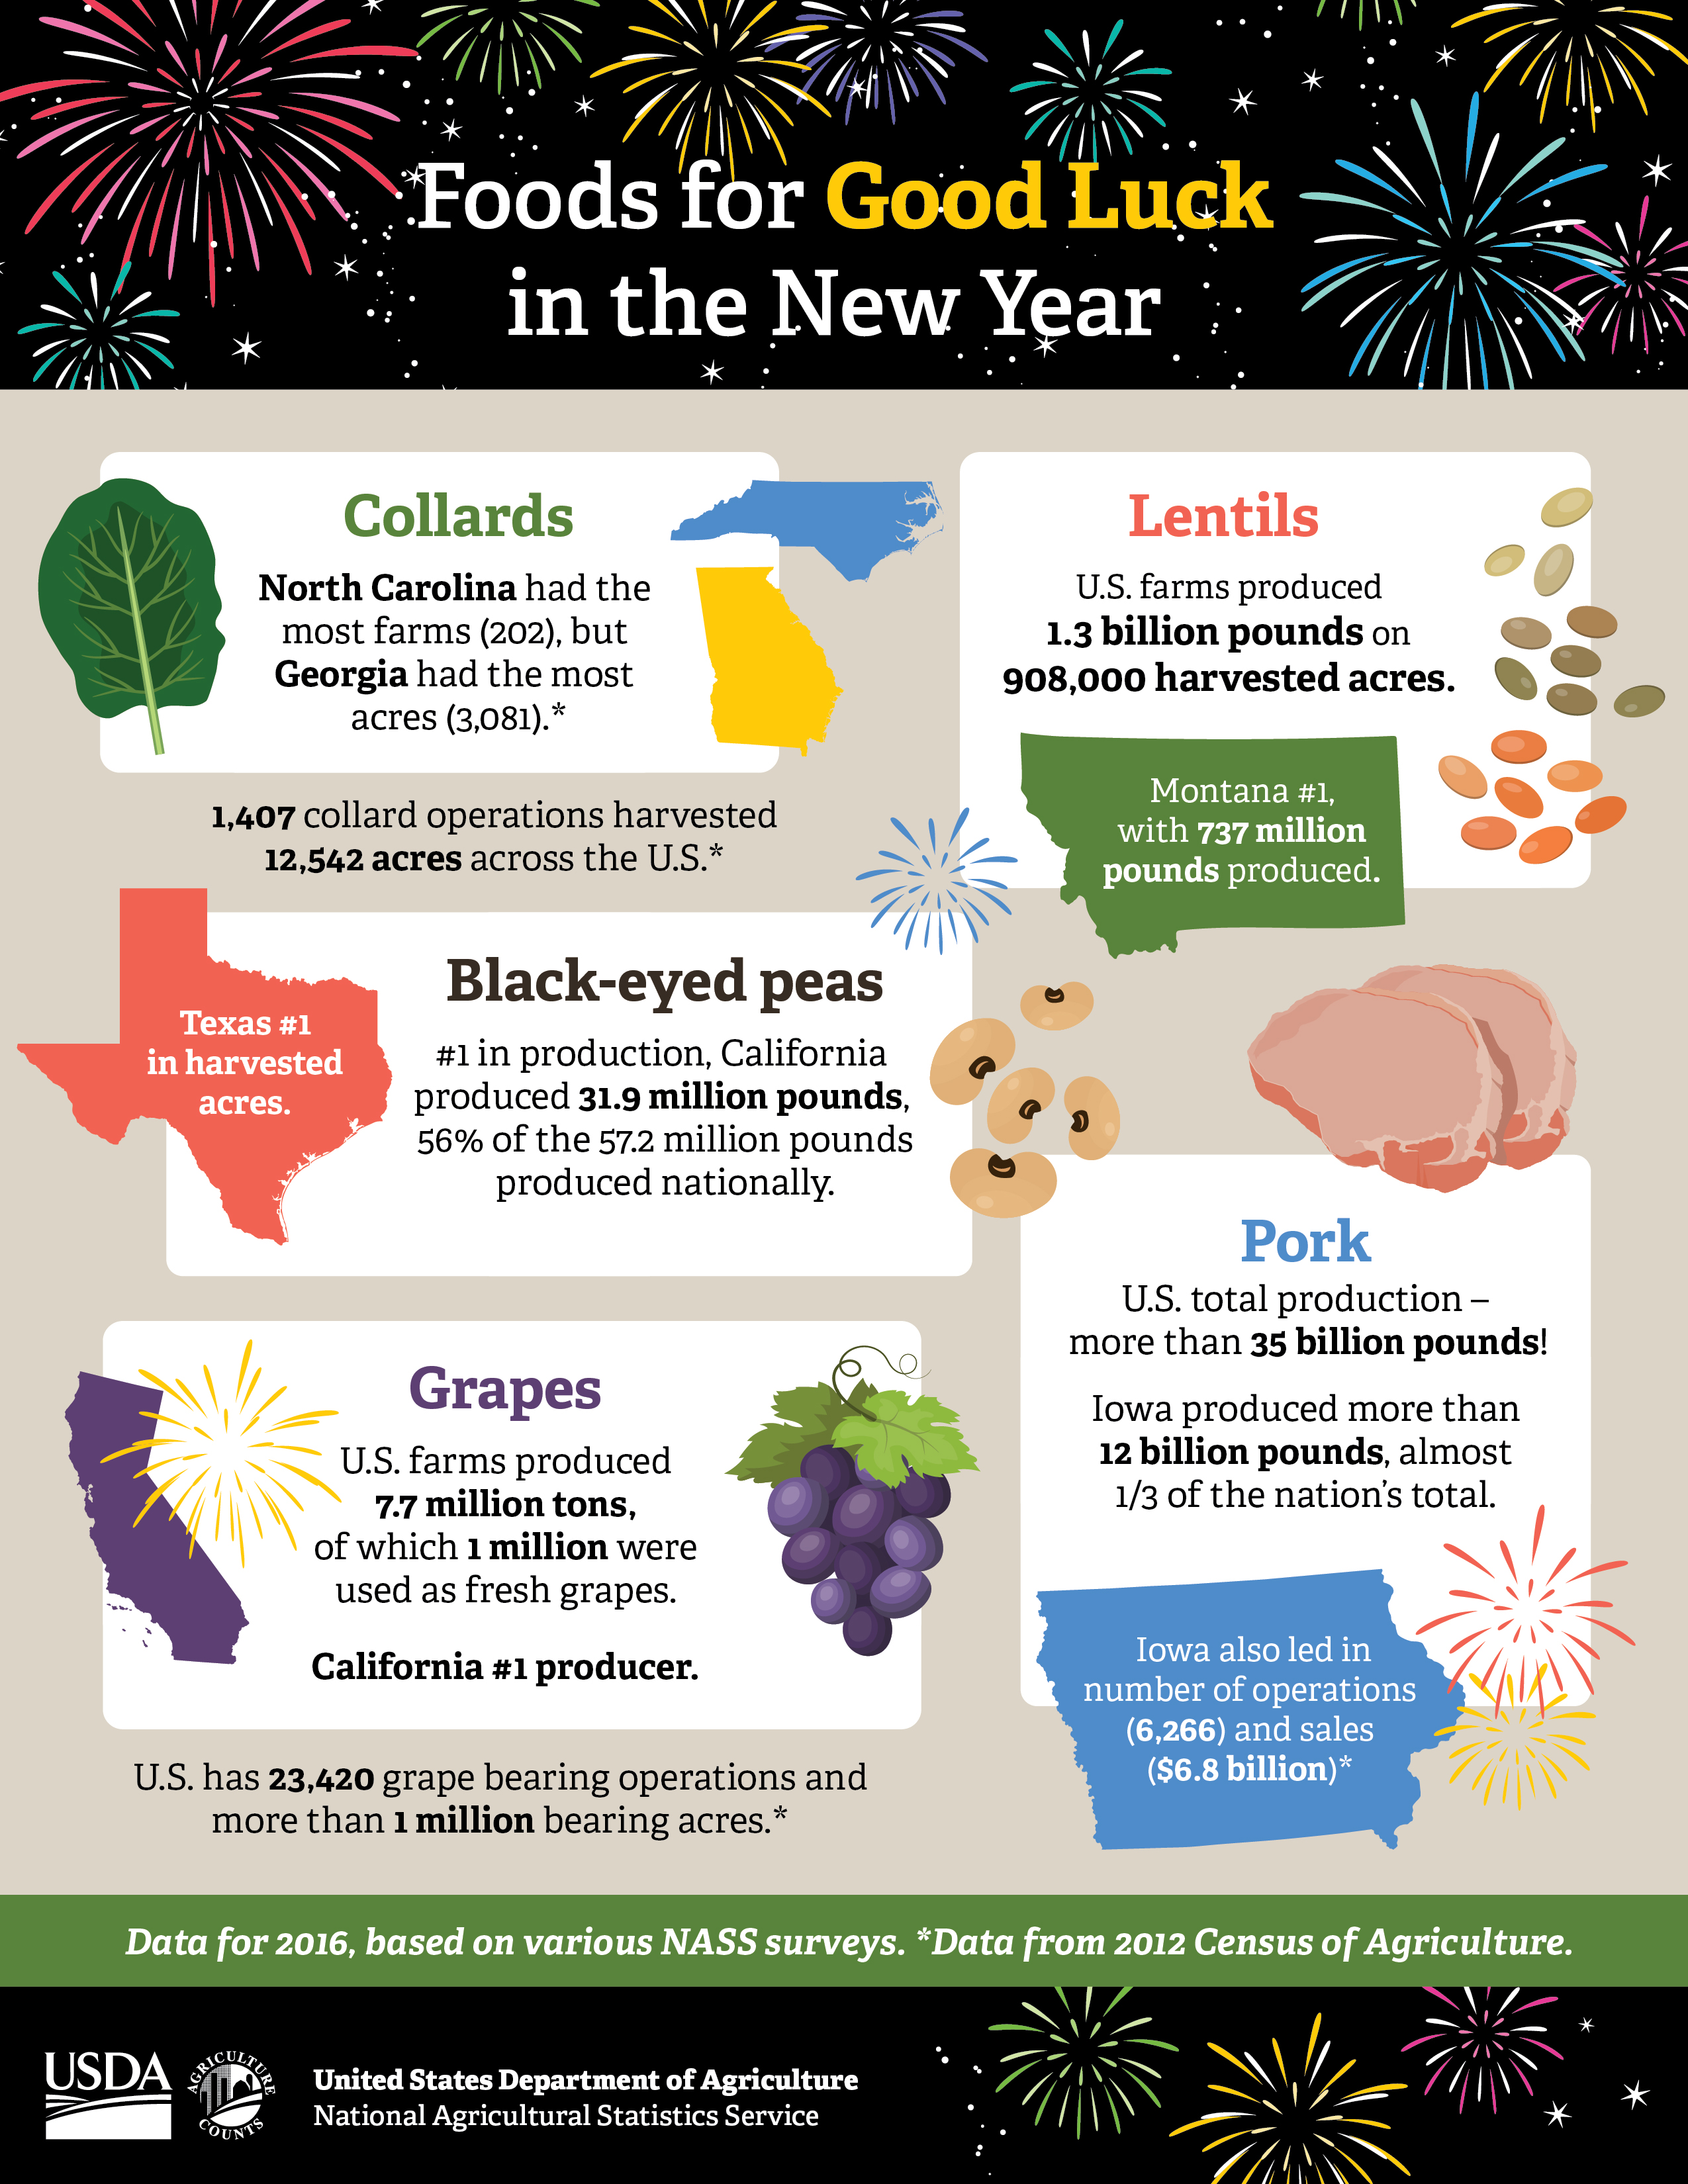 Make sure these “good luck” foods and all food count. Be a part of the 2017 Census of Agriculture. The Census is a complete count of U.S. farms and ranches and the people who operate them.